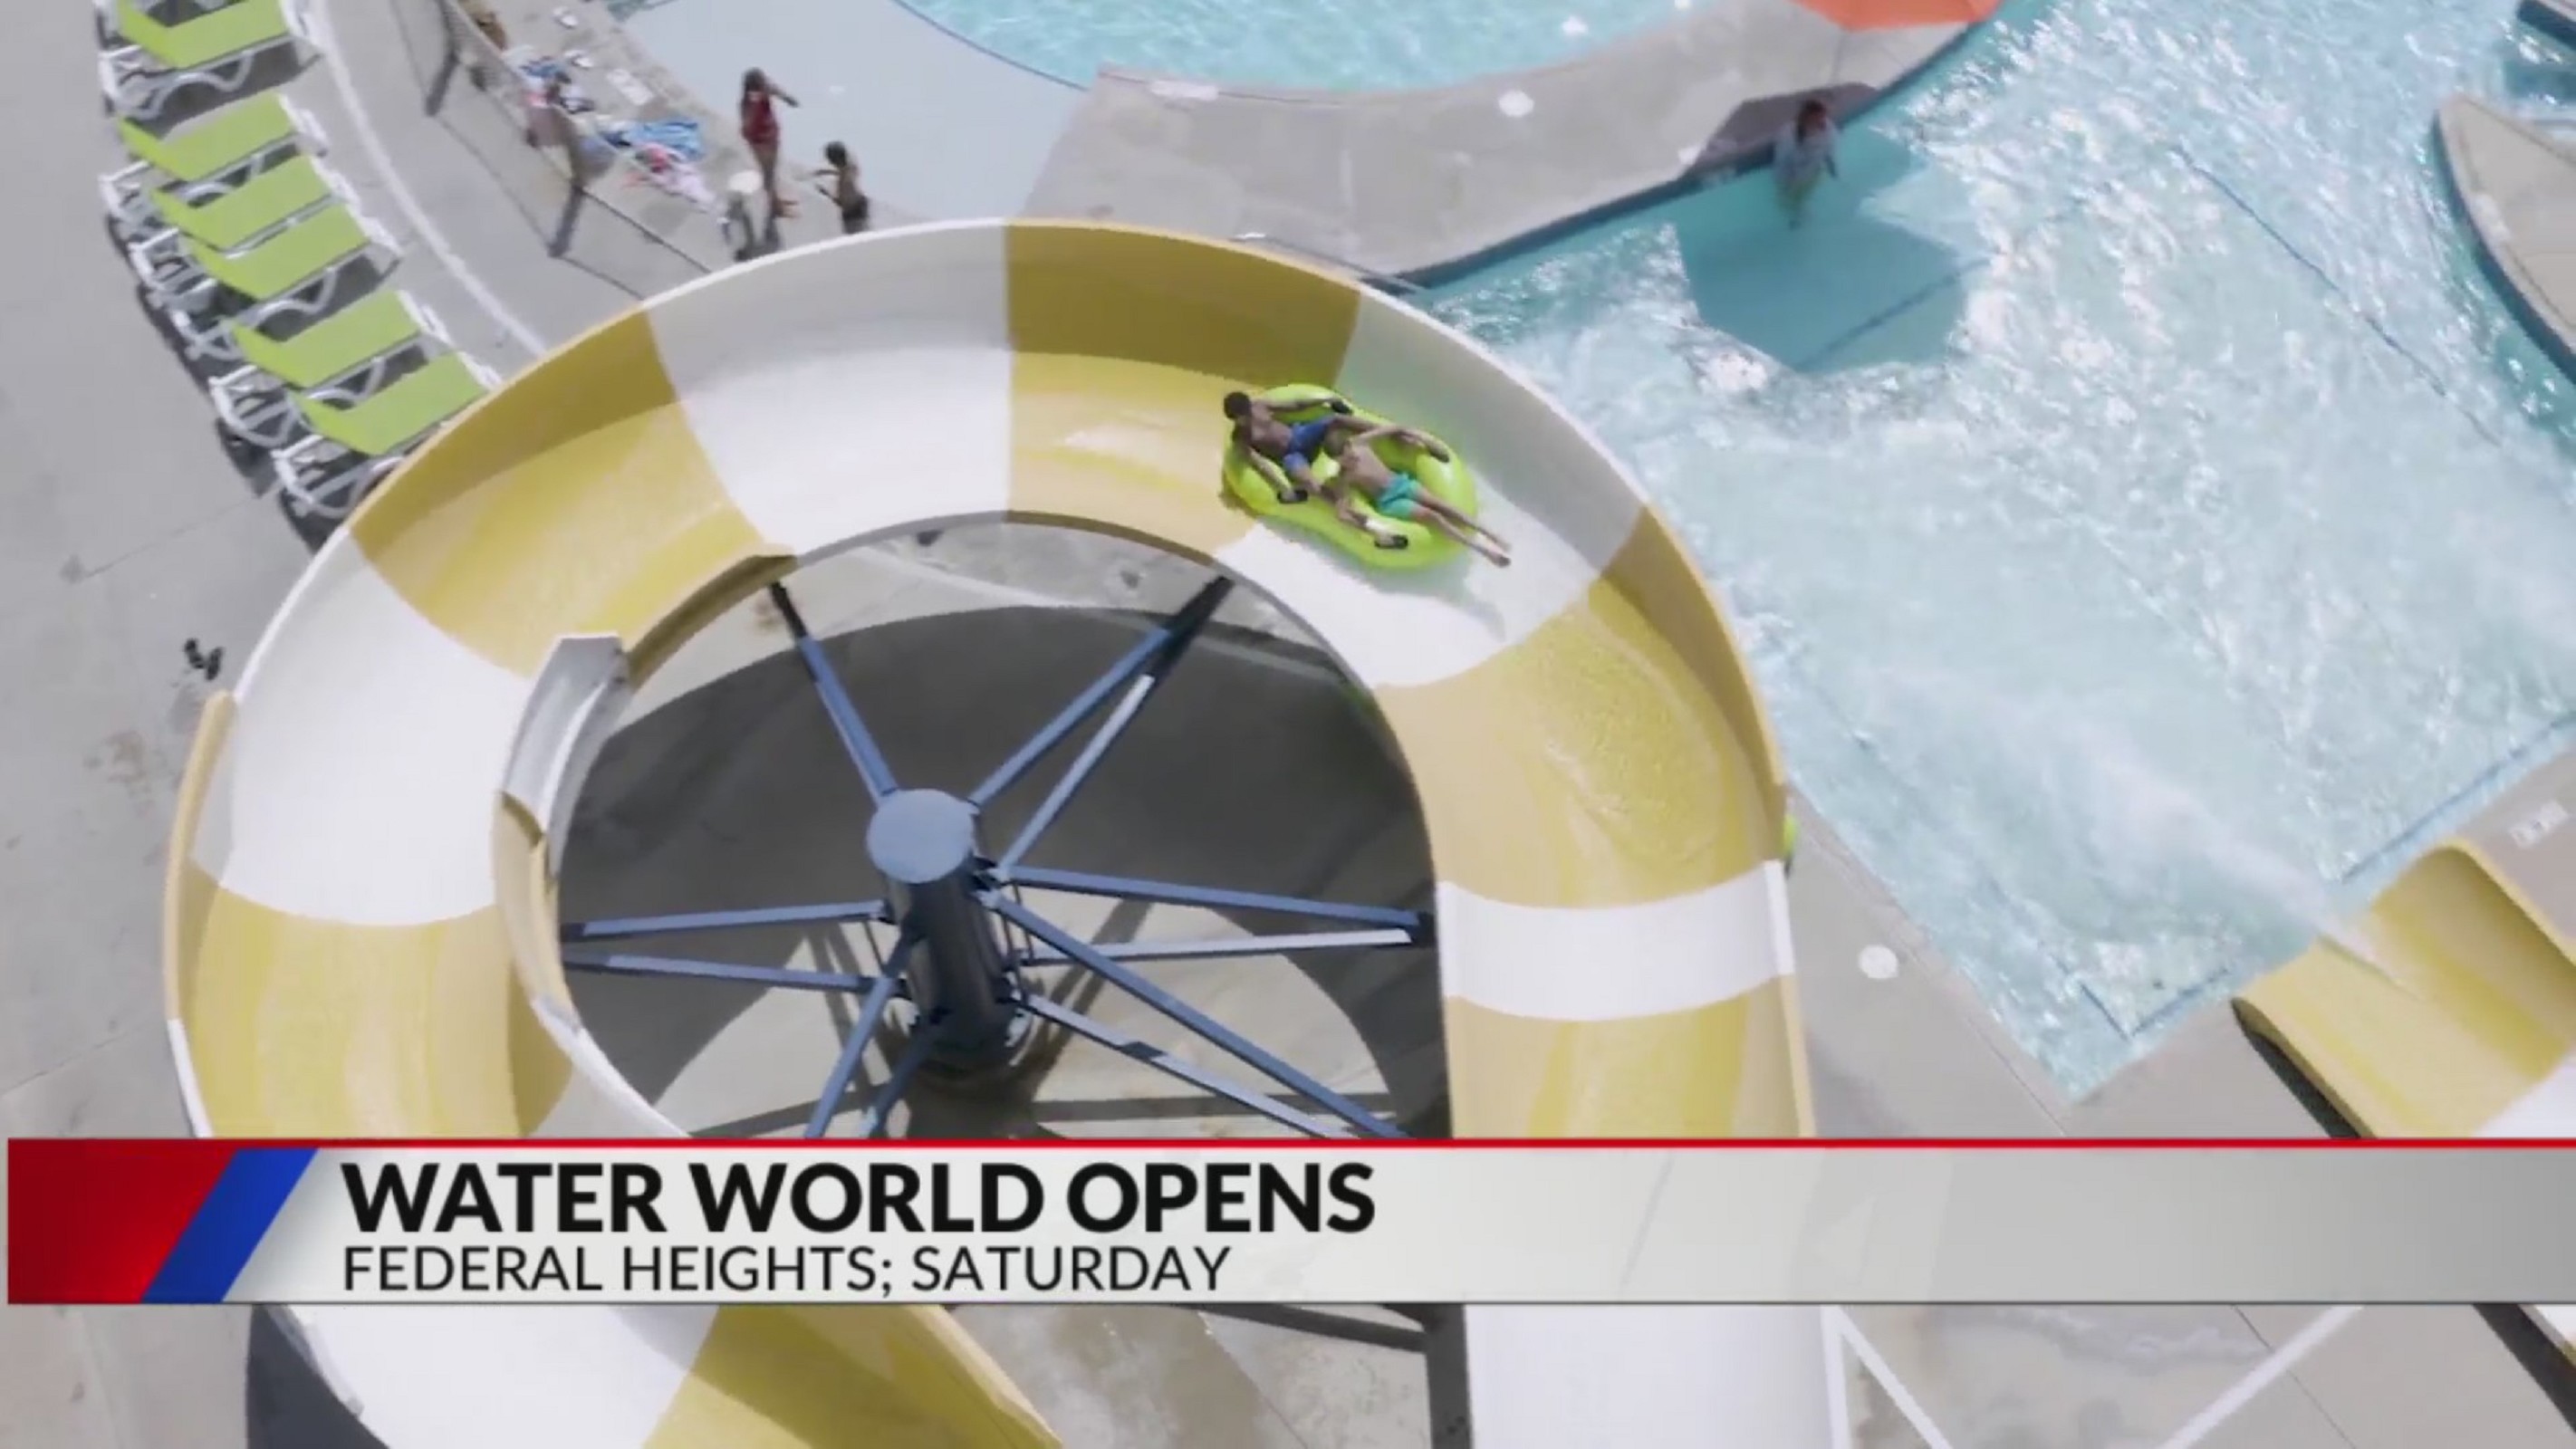 Water World in Federal Heights opens season on Saturday